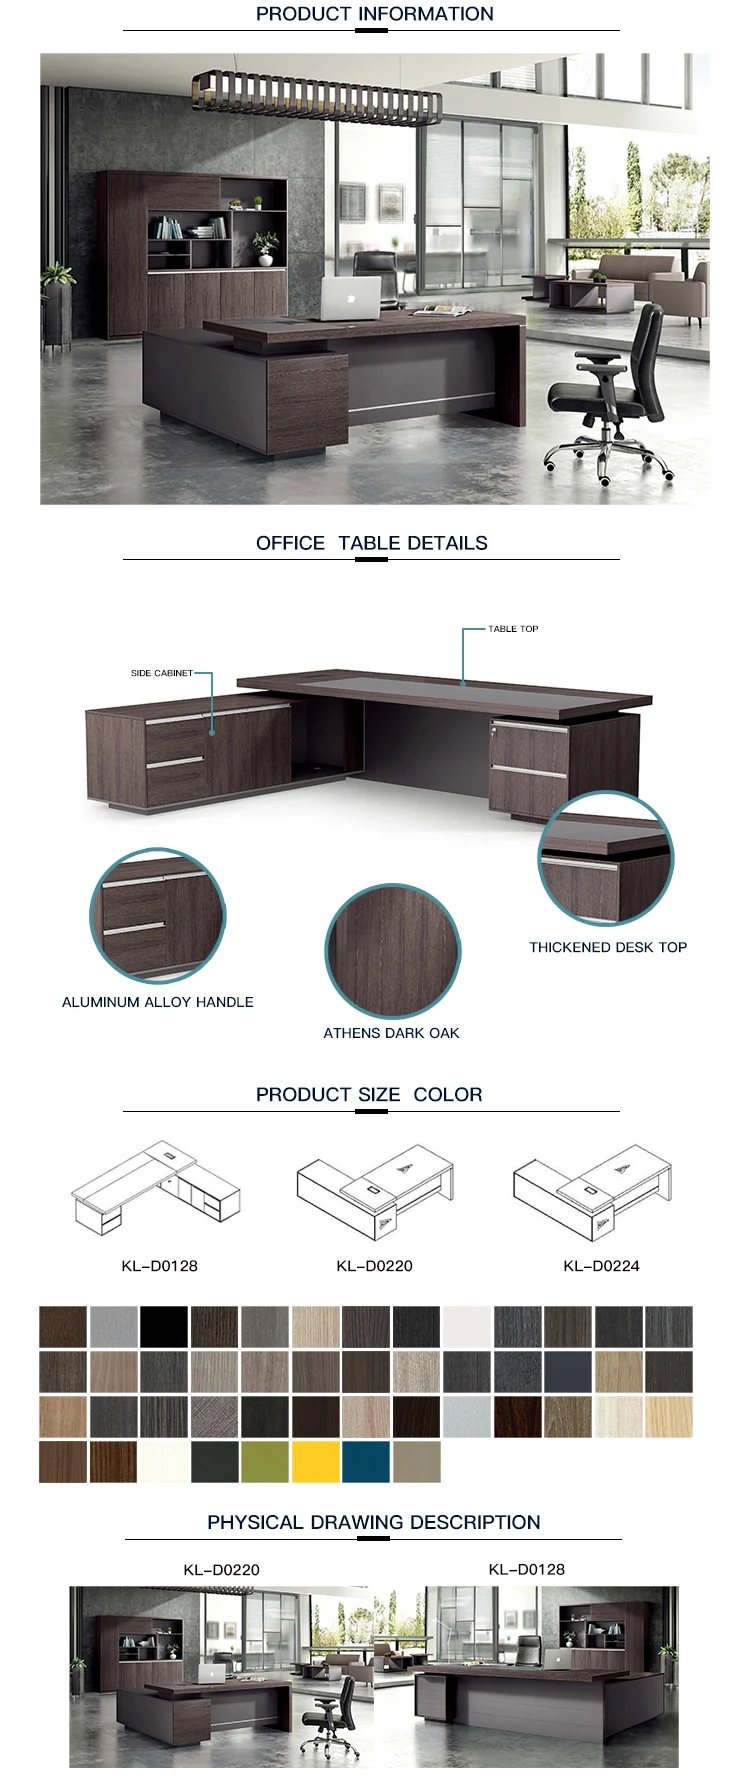 China supplier factory price Dious office furniture executive modern luxury desk boss office desks table